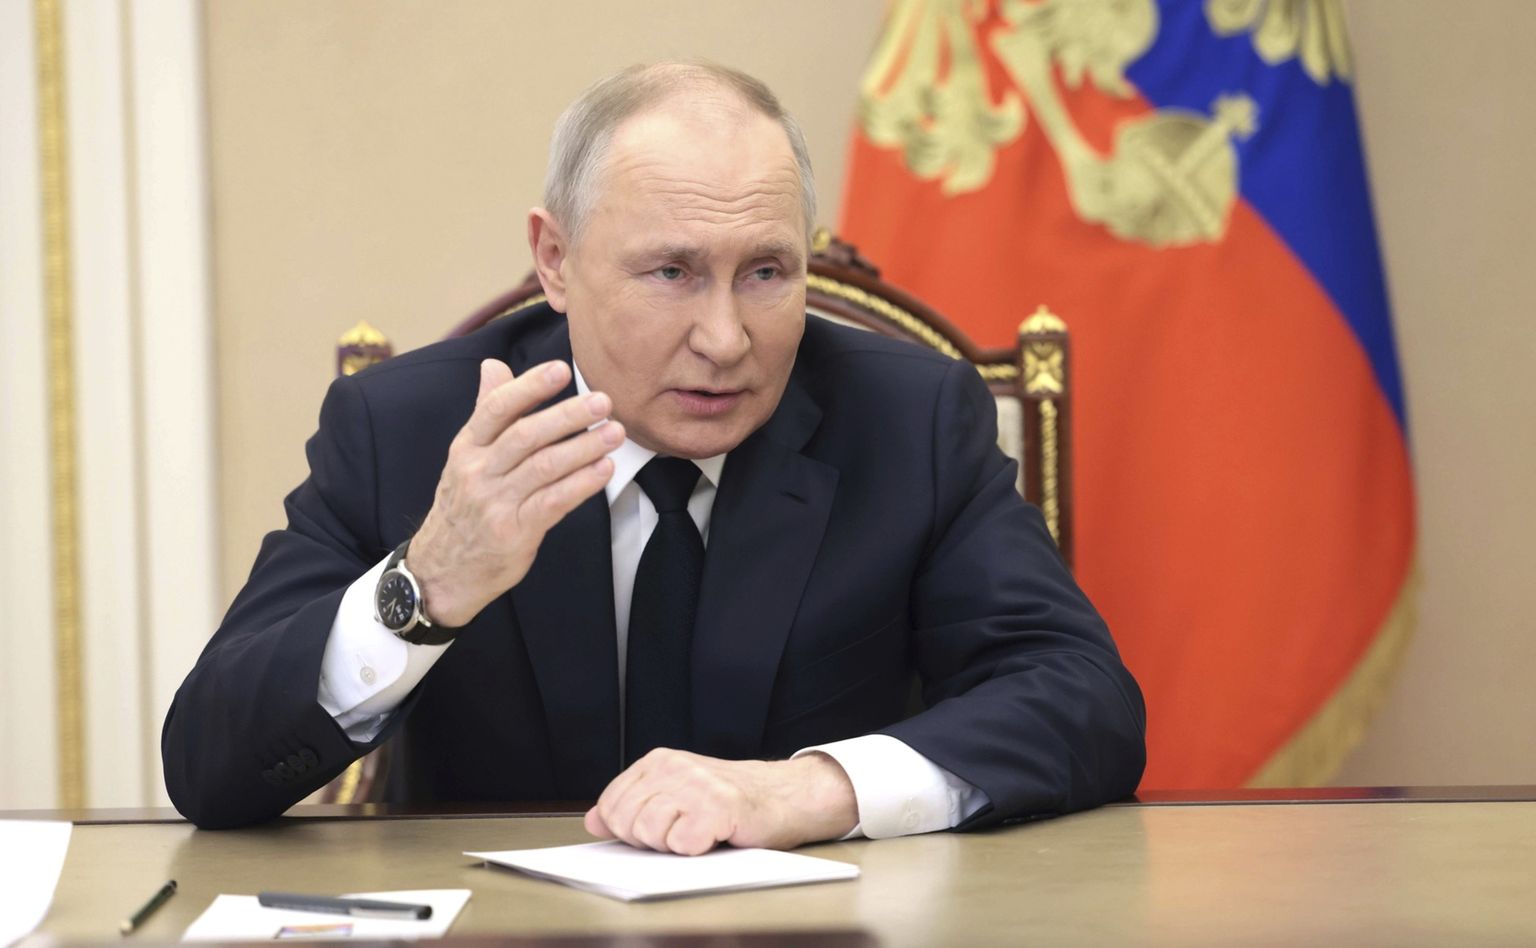 March 2, 2023, Moscow, Moscow Oblast, Russia: Russian President Vladimir Putin holds a remote launch of the Year of Teachers and Mentors in Russia from the Kremlin, March 2, 2023 in Moscow, Russia. (Credit Image: © Mikhail Metzel/Kremlin Pool/Planet Pix via ZUMA Press Wire)